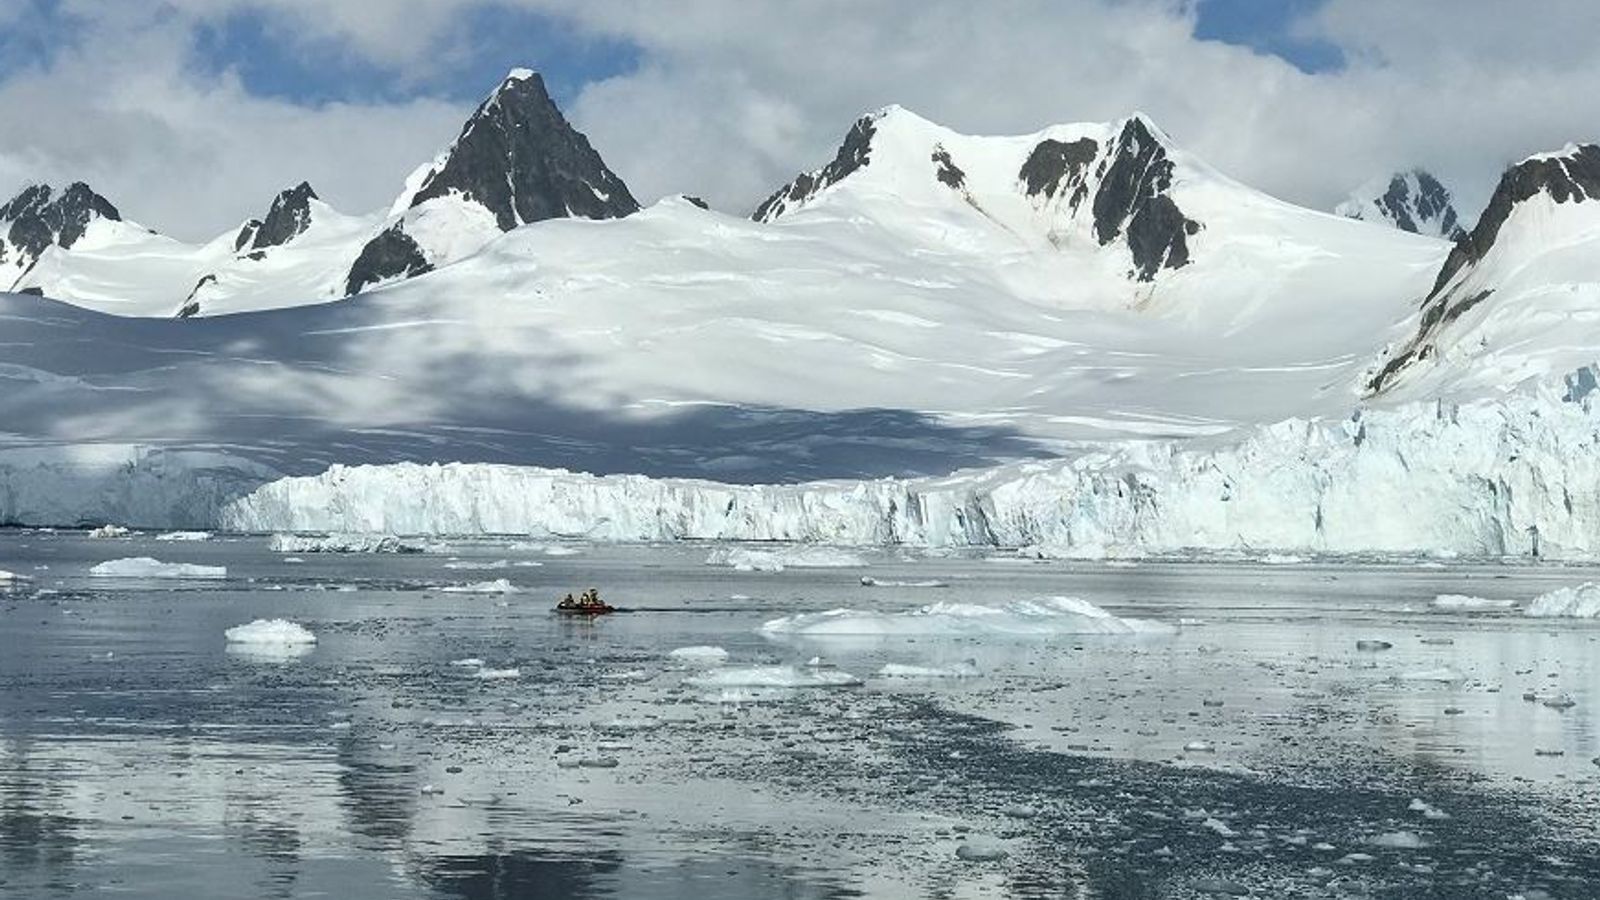 Daily updates as Sky heads into Antarctic wilderness, Climate News